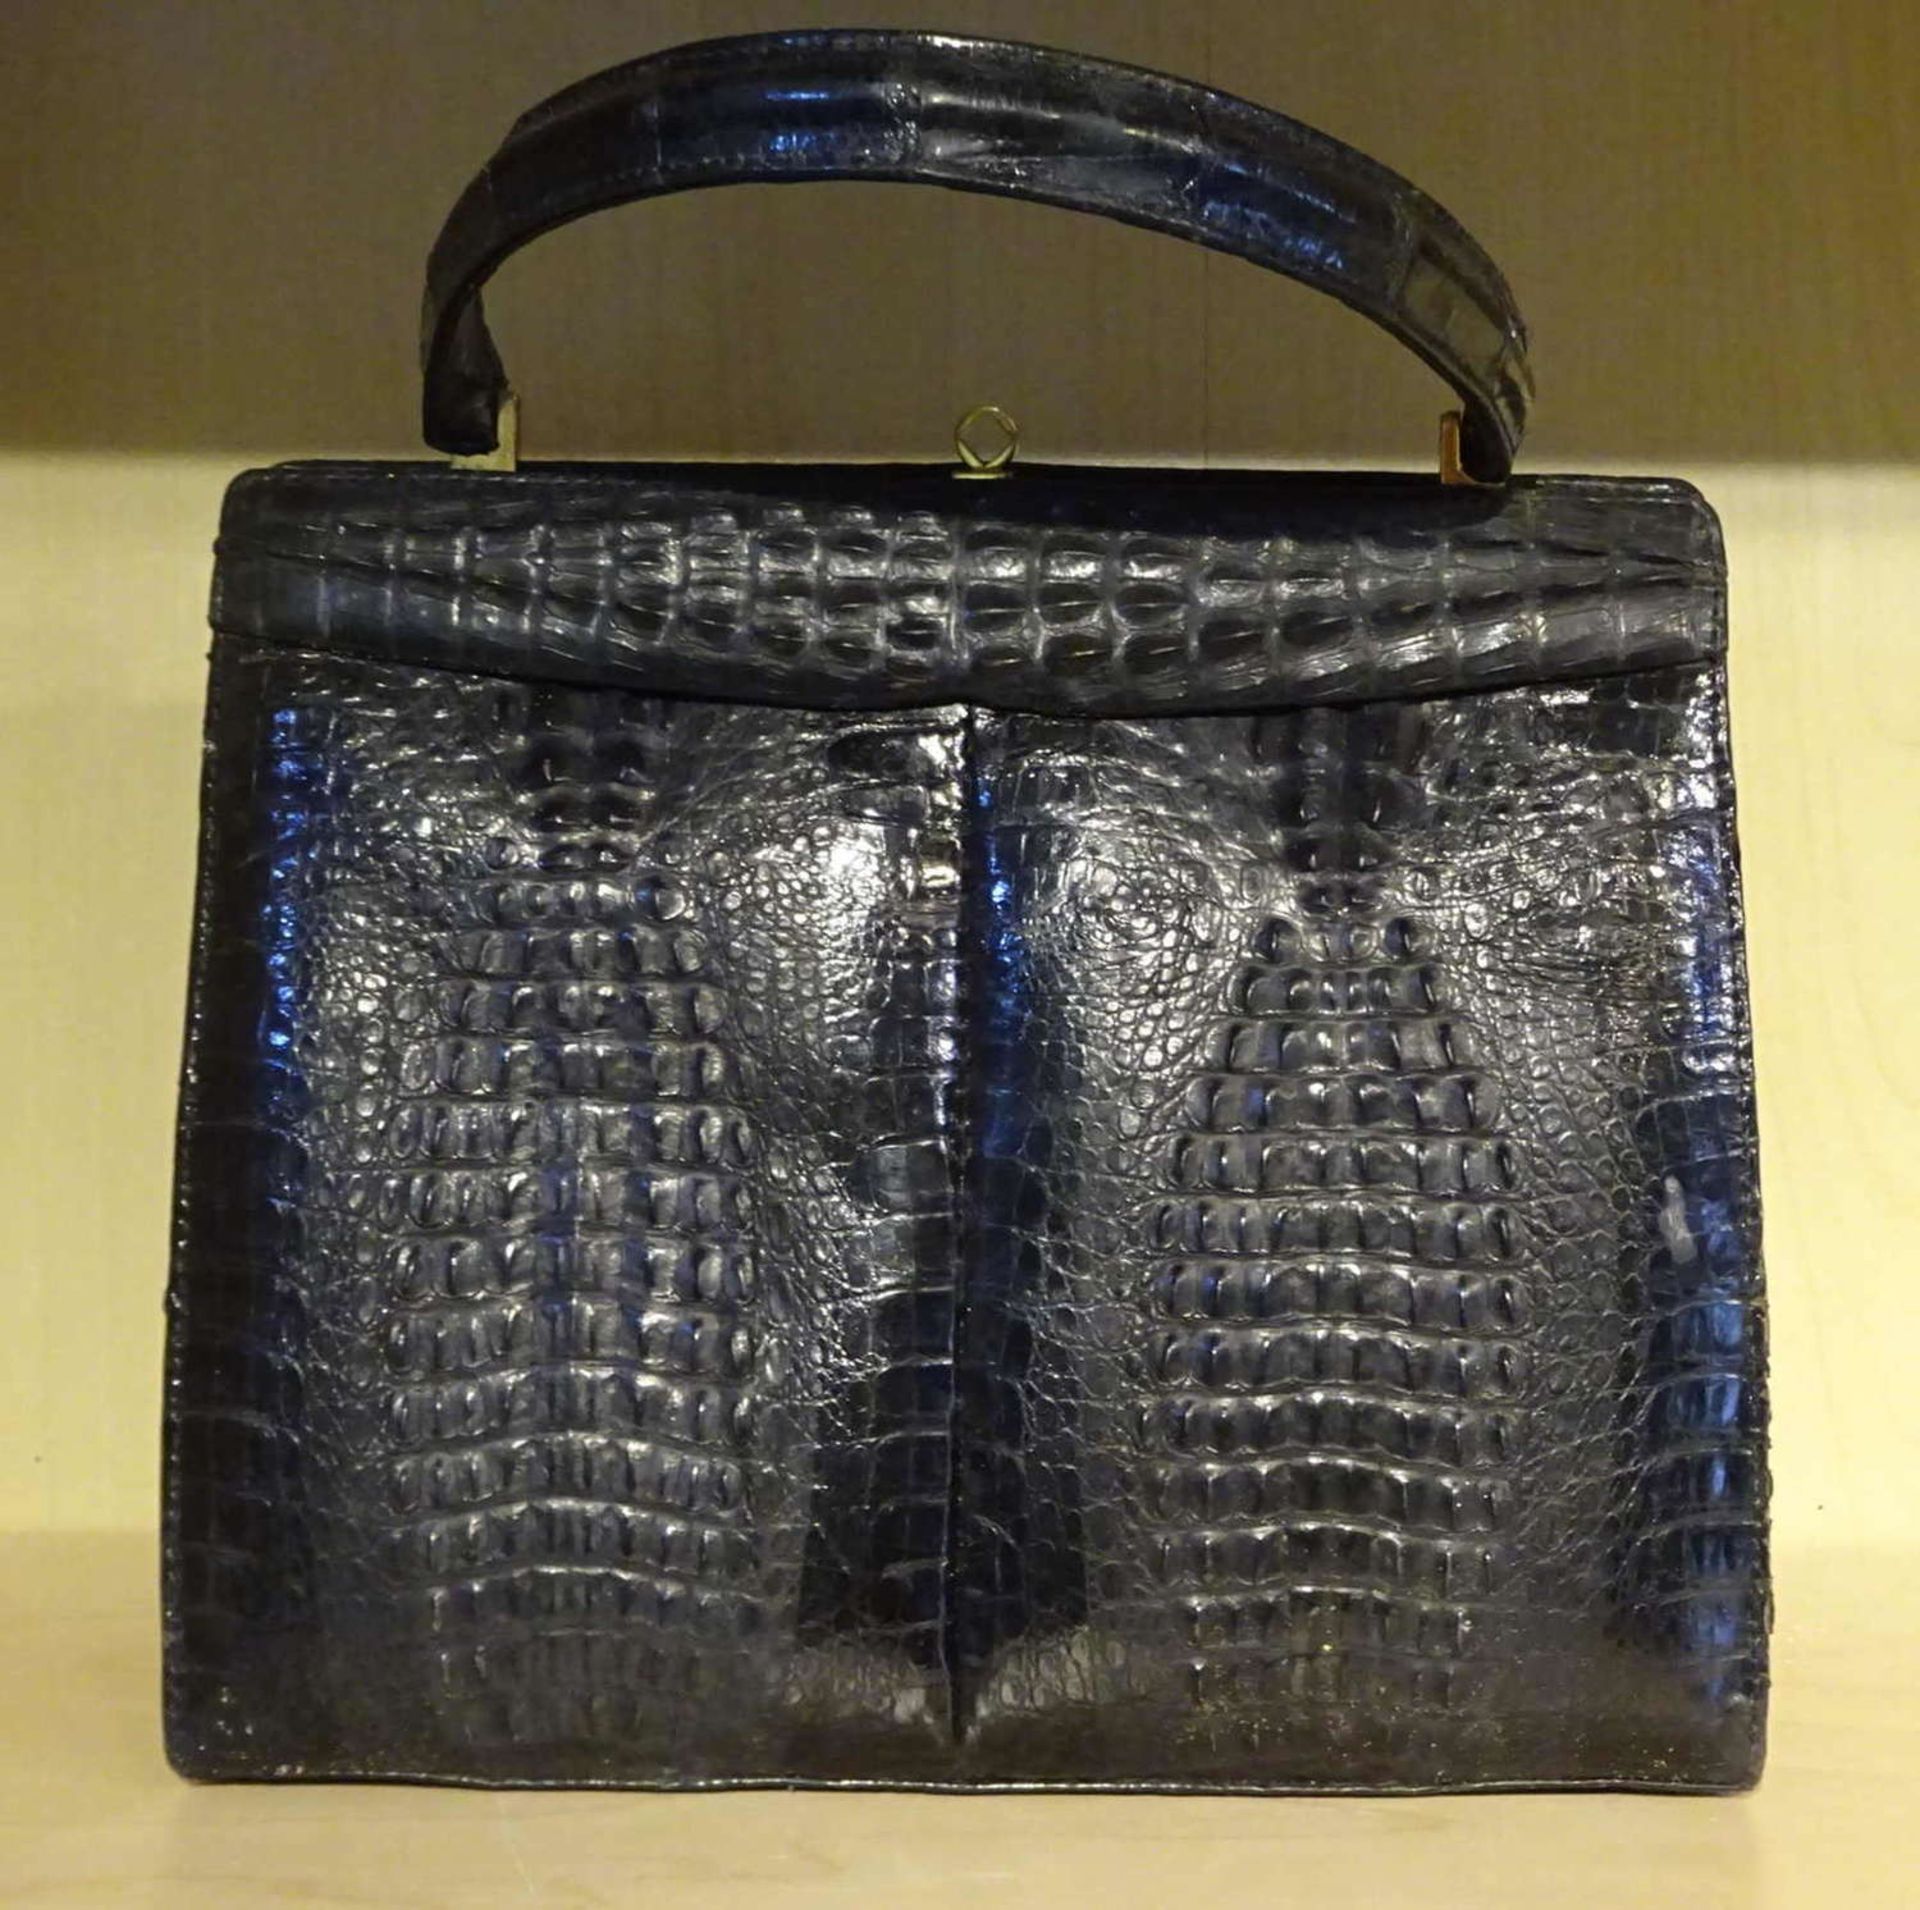 Reptilienledertasche, gebrauchter Zustand.Reptile leather bag, used condition.